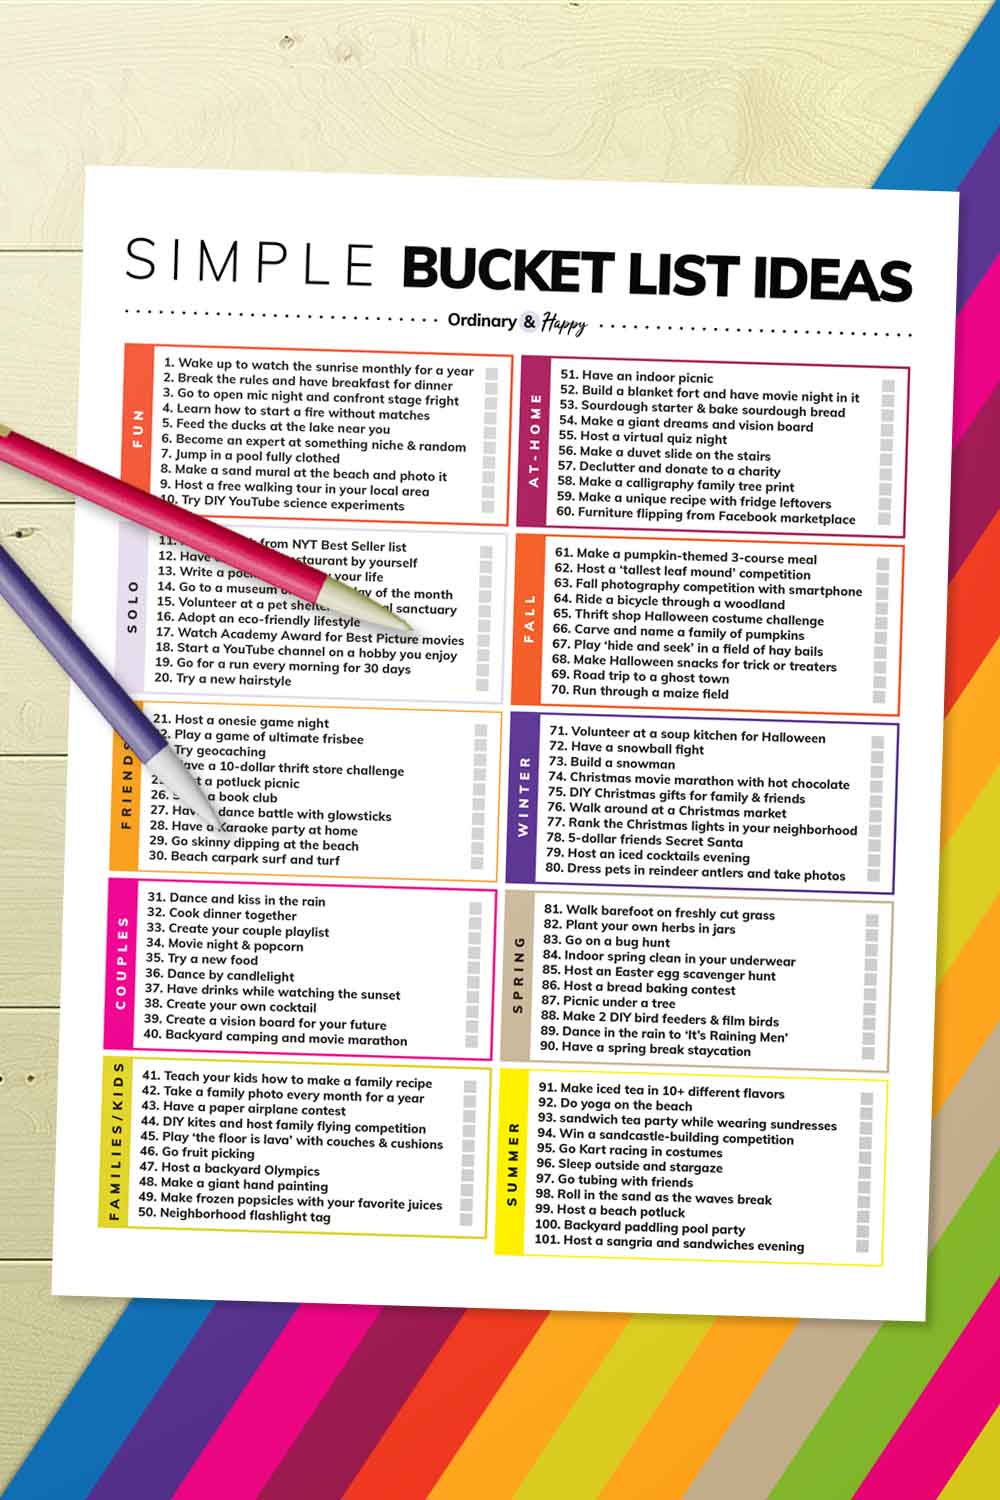 What should a bucket list contain?